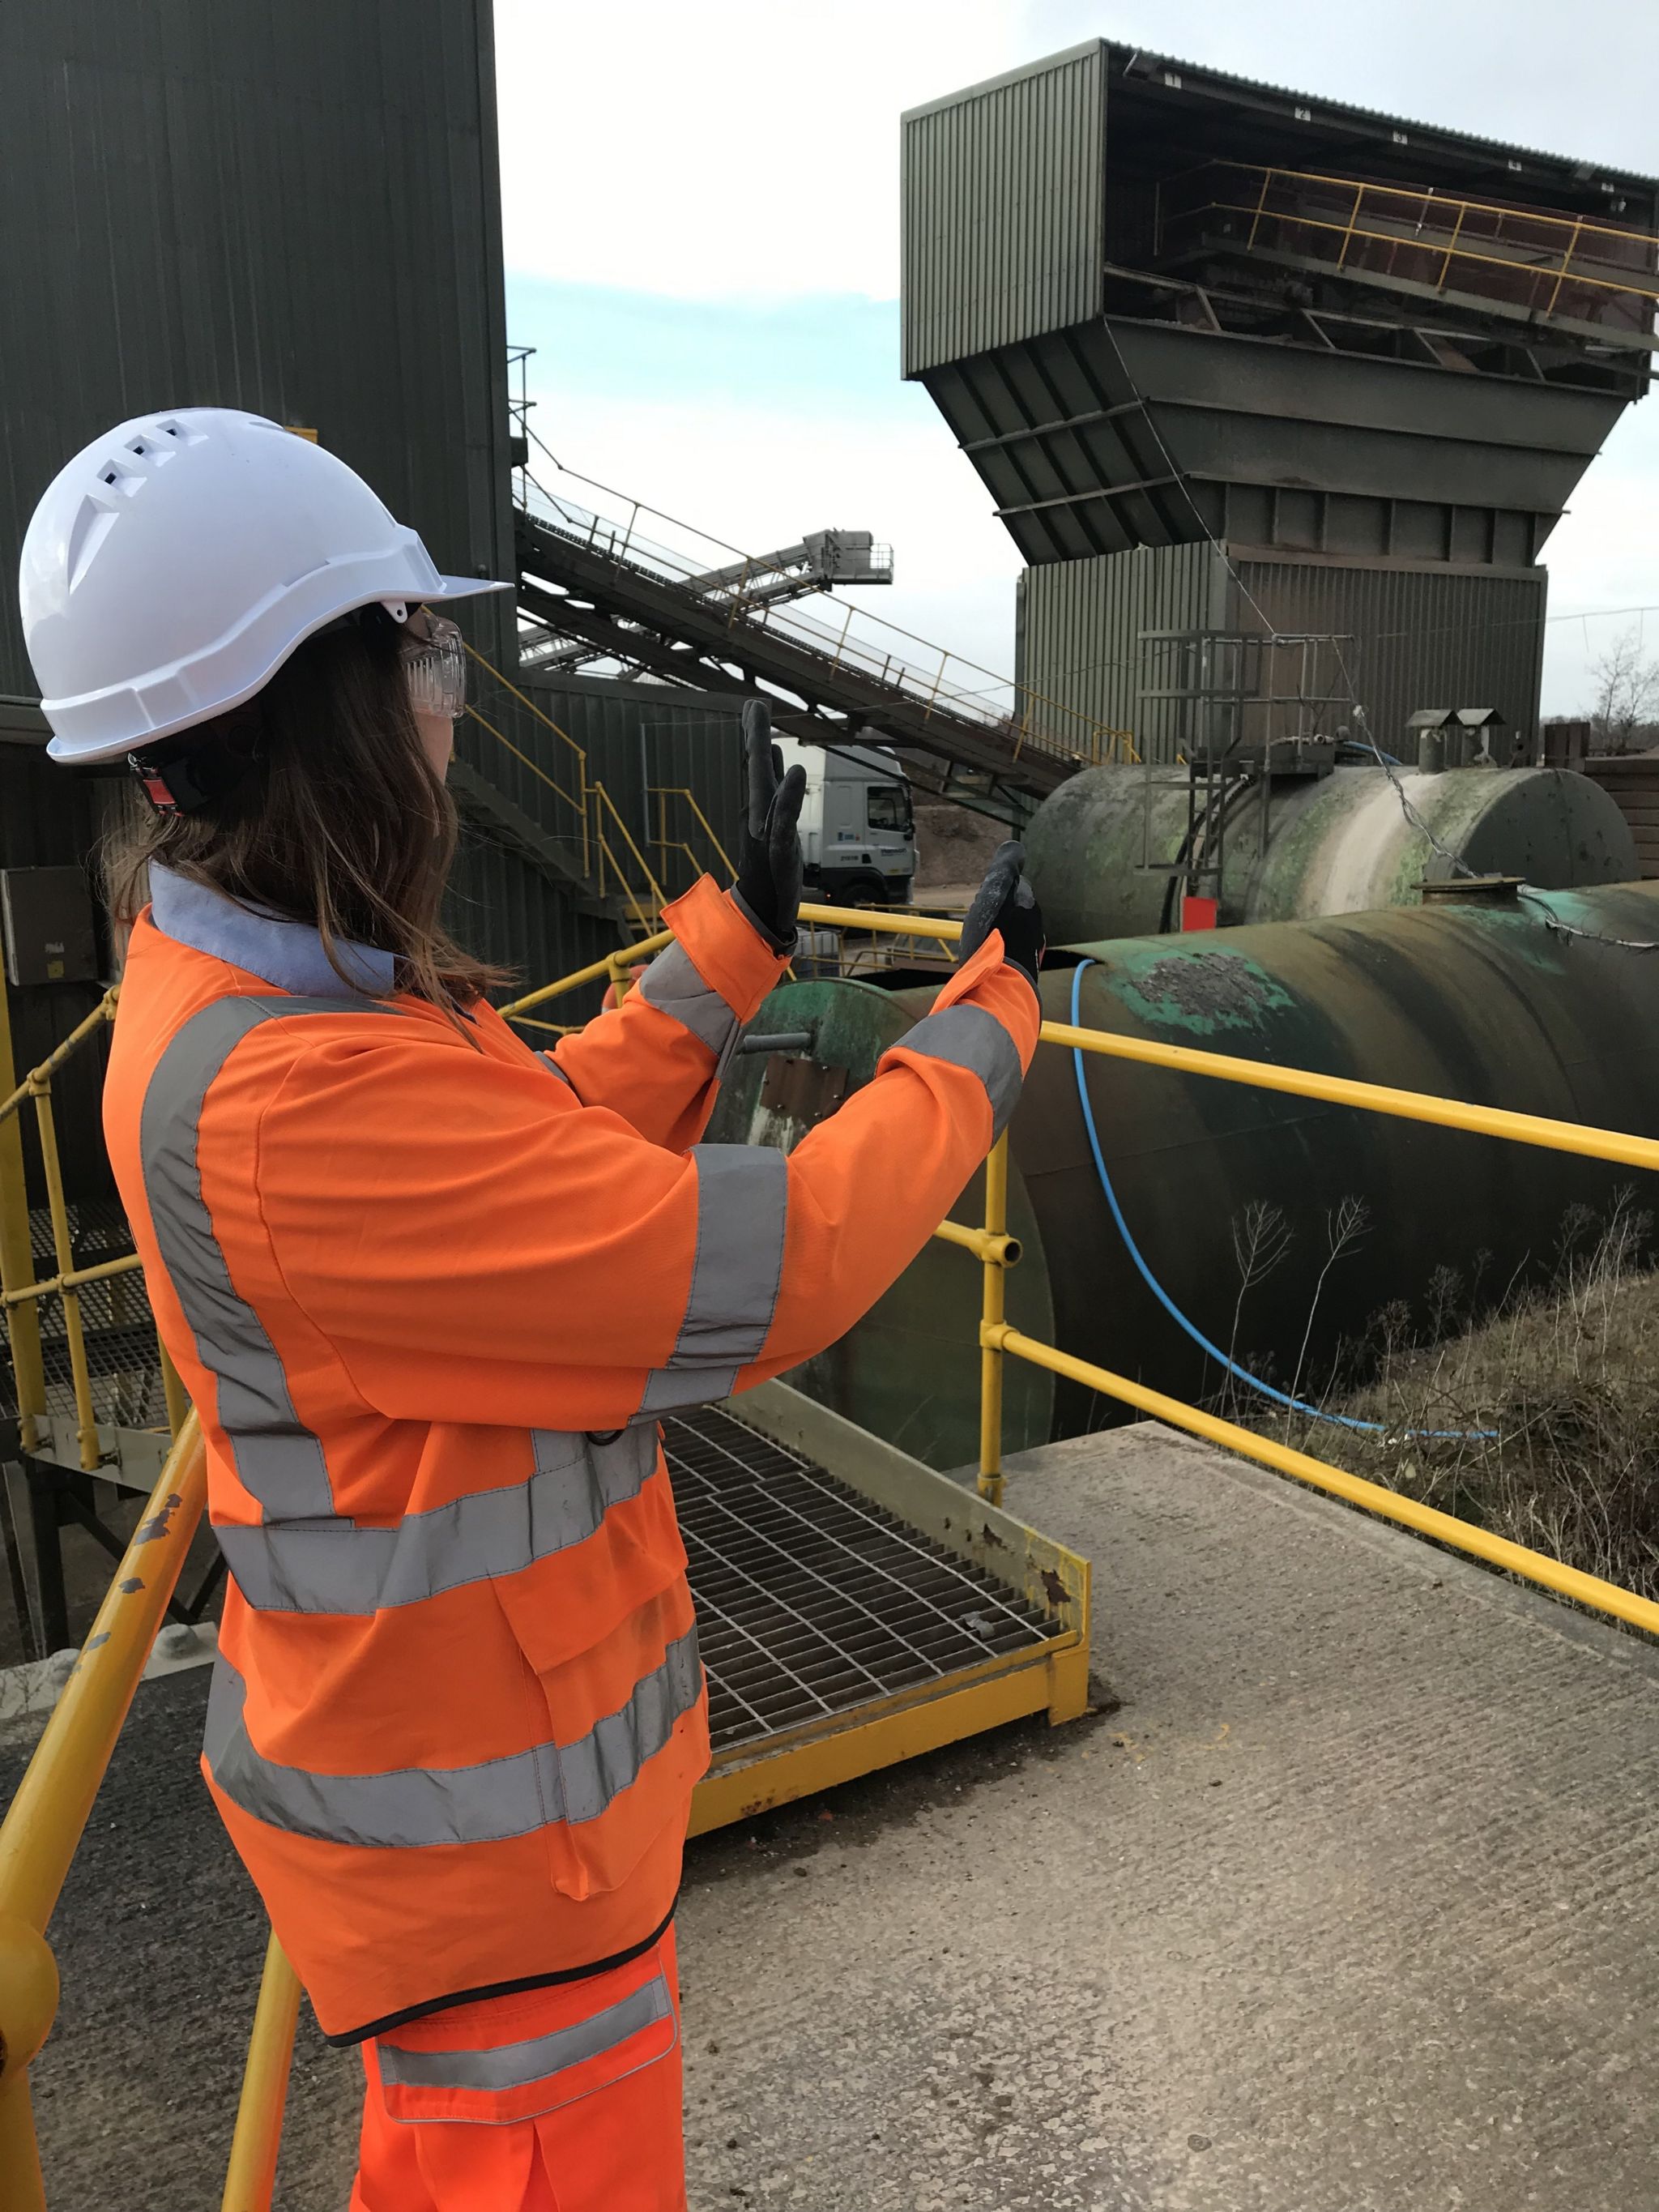 Emily at Weeford concrete plant